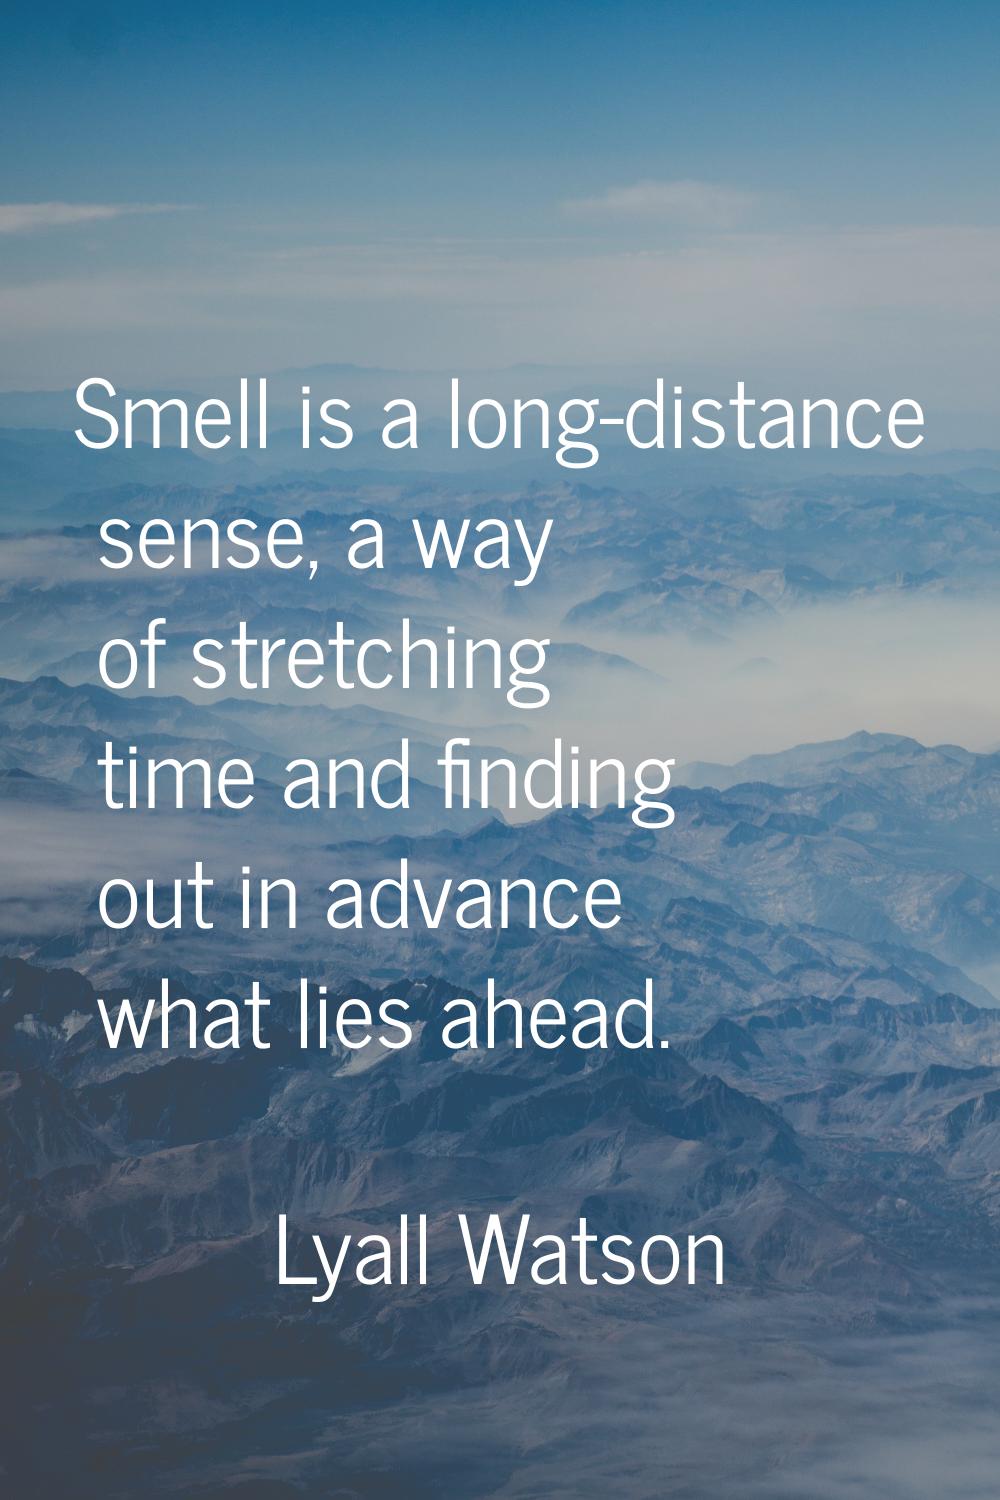 Smell is a long-distance sense, a way of stretching time and finding out in advance what lies ahead